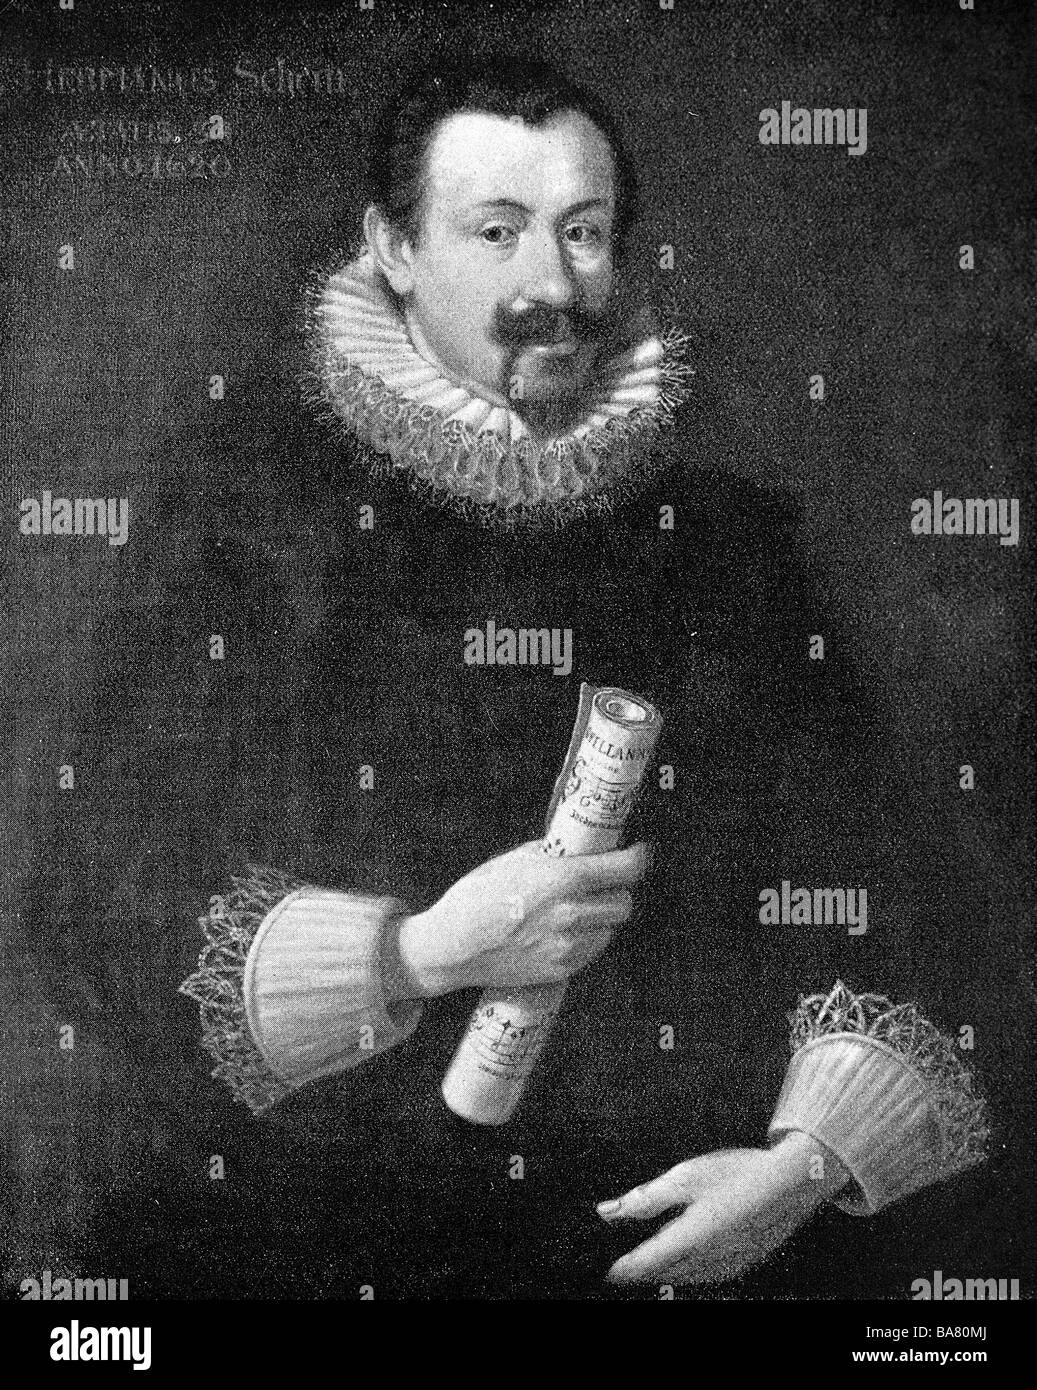 Schein, Johann Hermann, 20.1.1586 - 19.11.1630, German composer, half length, painting by an unknown master, St. Thomas School, Leipzig, Germany, , Artist's Copyright has not to be cleared Stock Photo